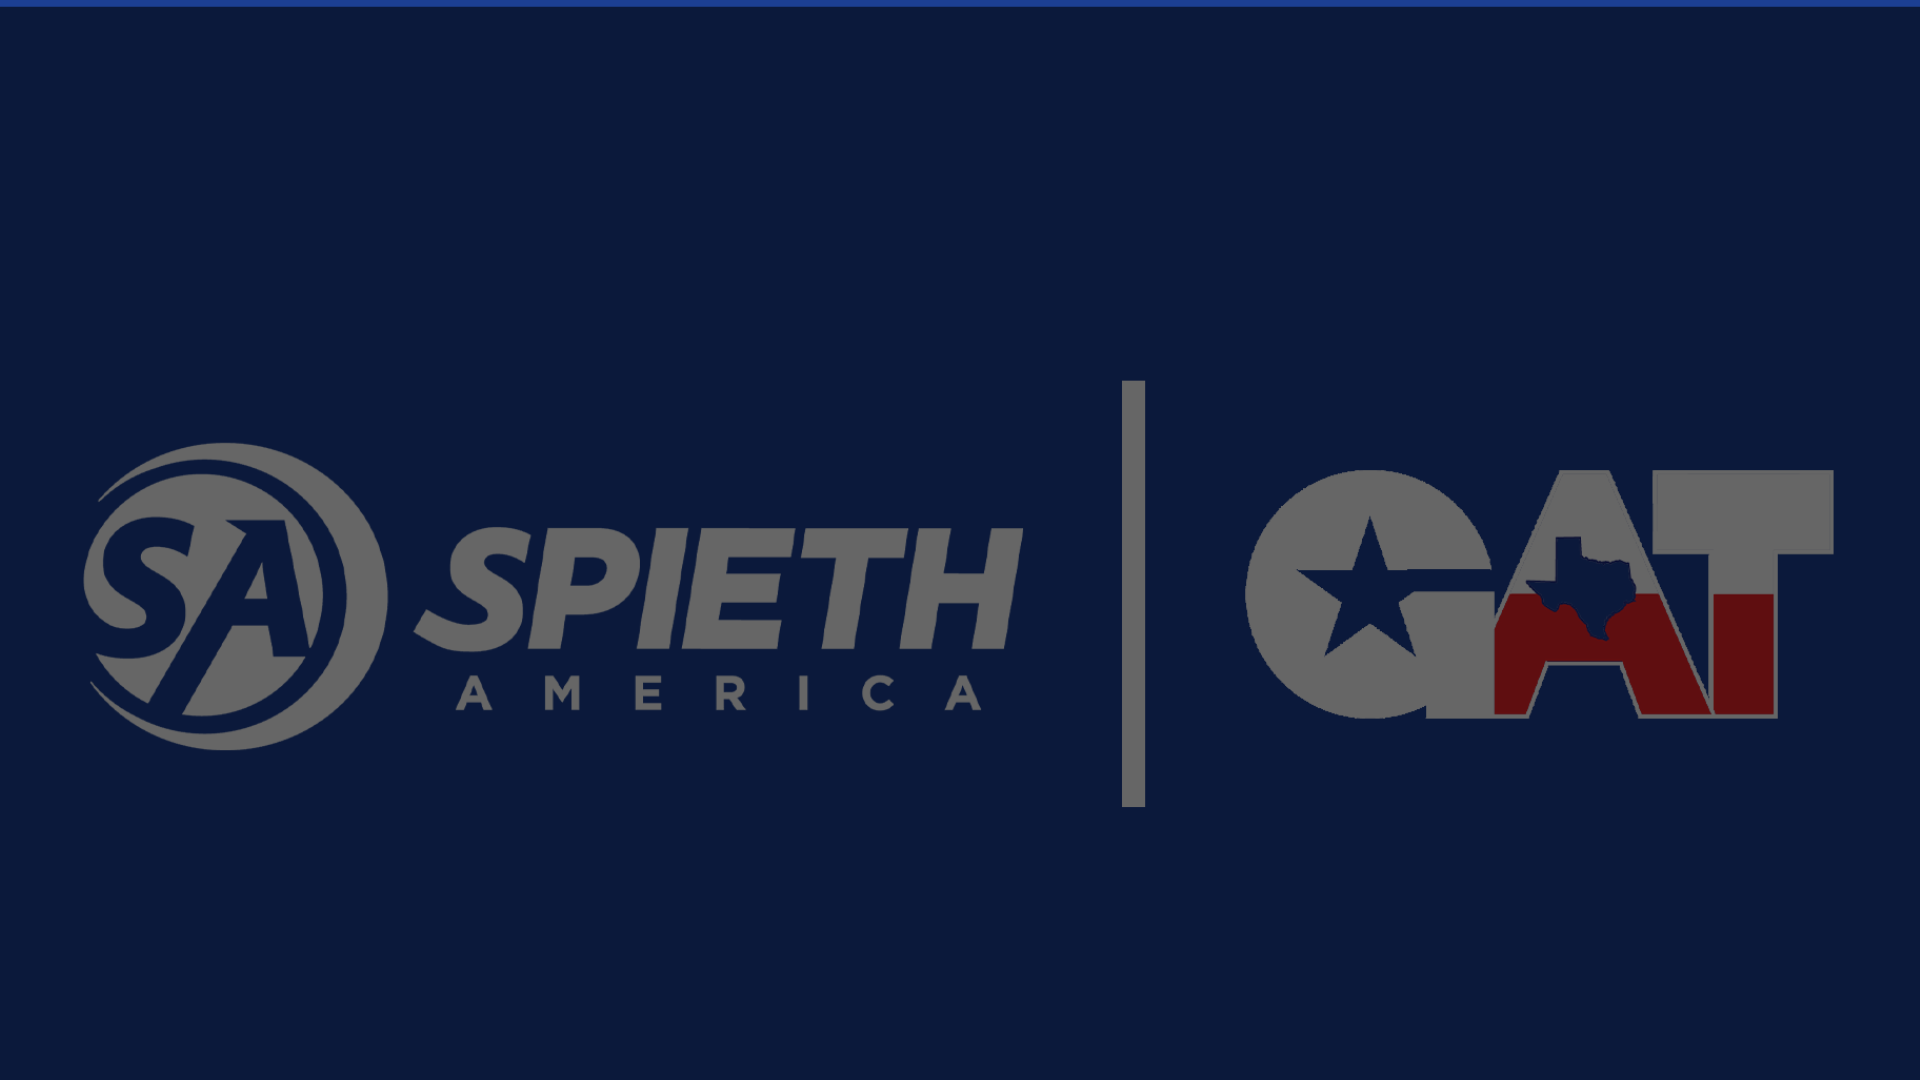 SPIETH AMERICA AND GAT ANNOUNCE EXCLUSIVE EQUIPMENT PARTNERSHIP THROUGH 2030